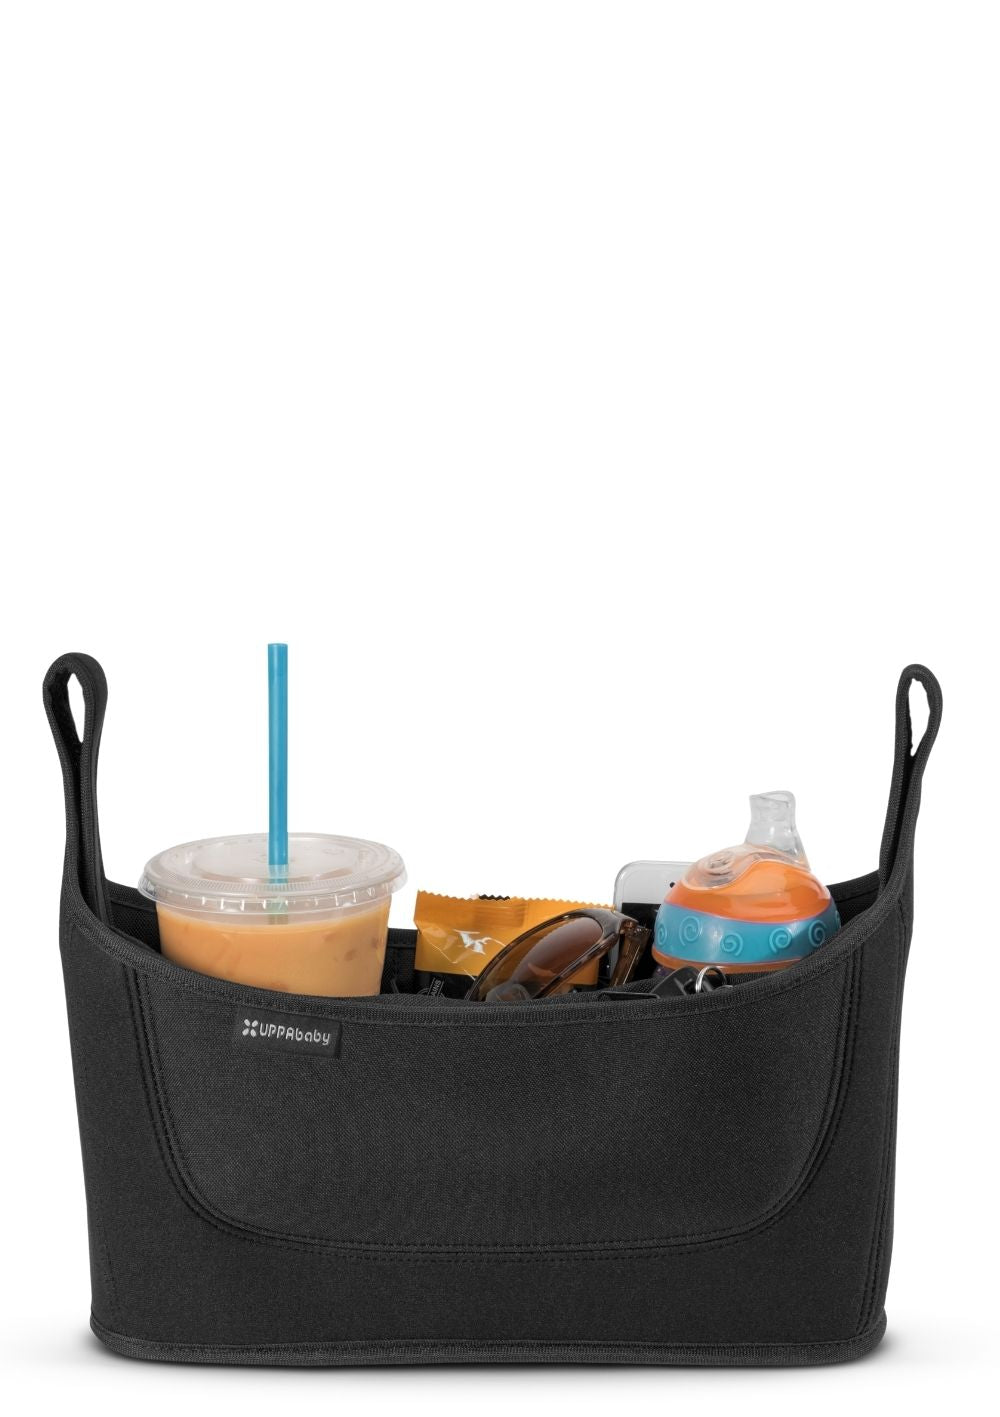 UPPAbaby Carry All Organizer